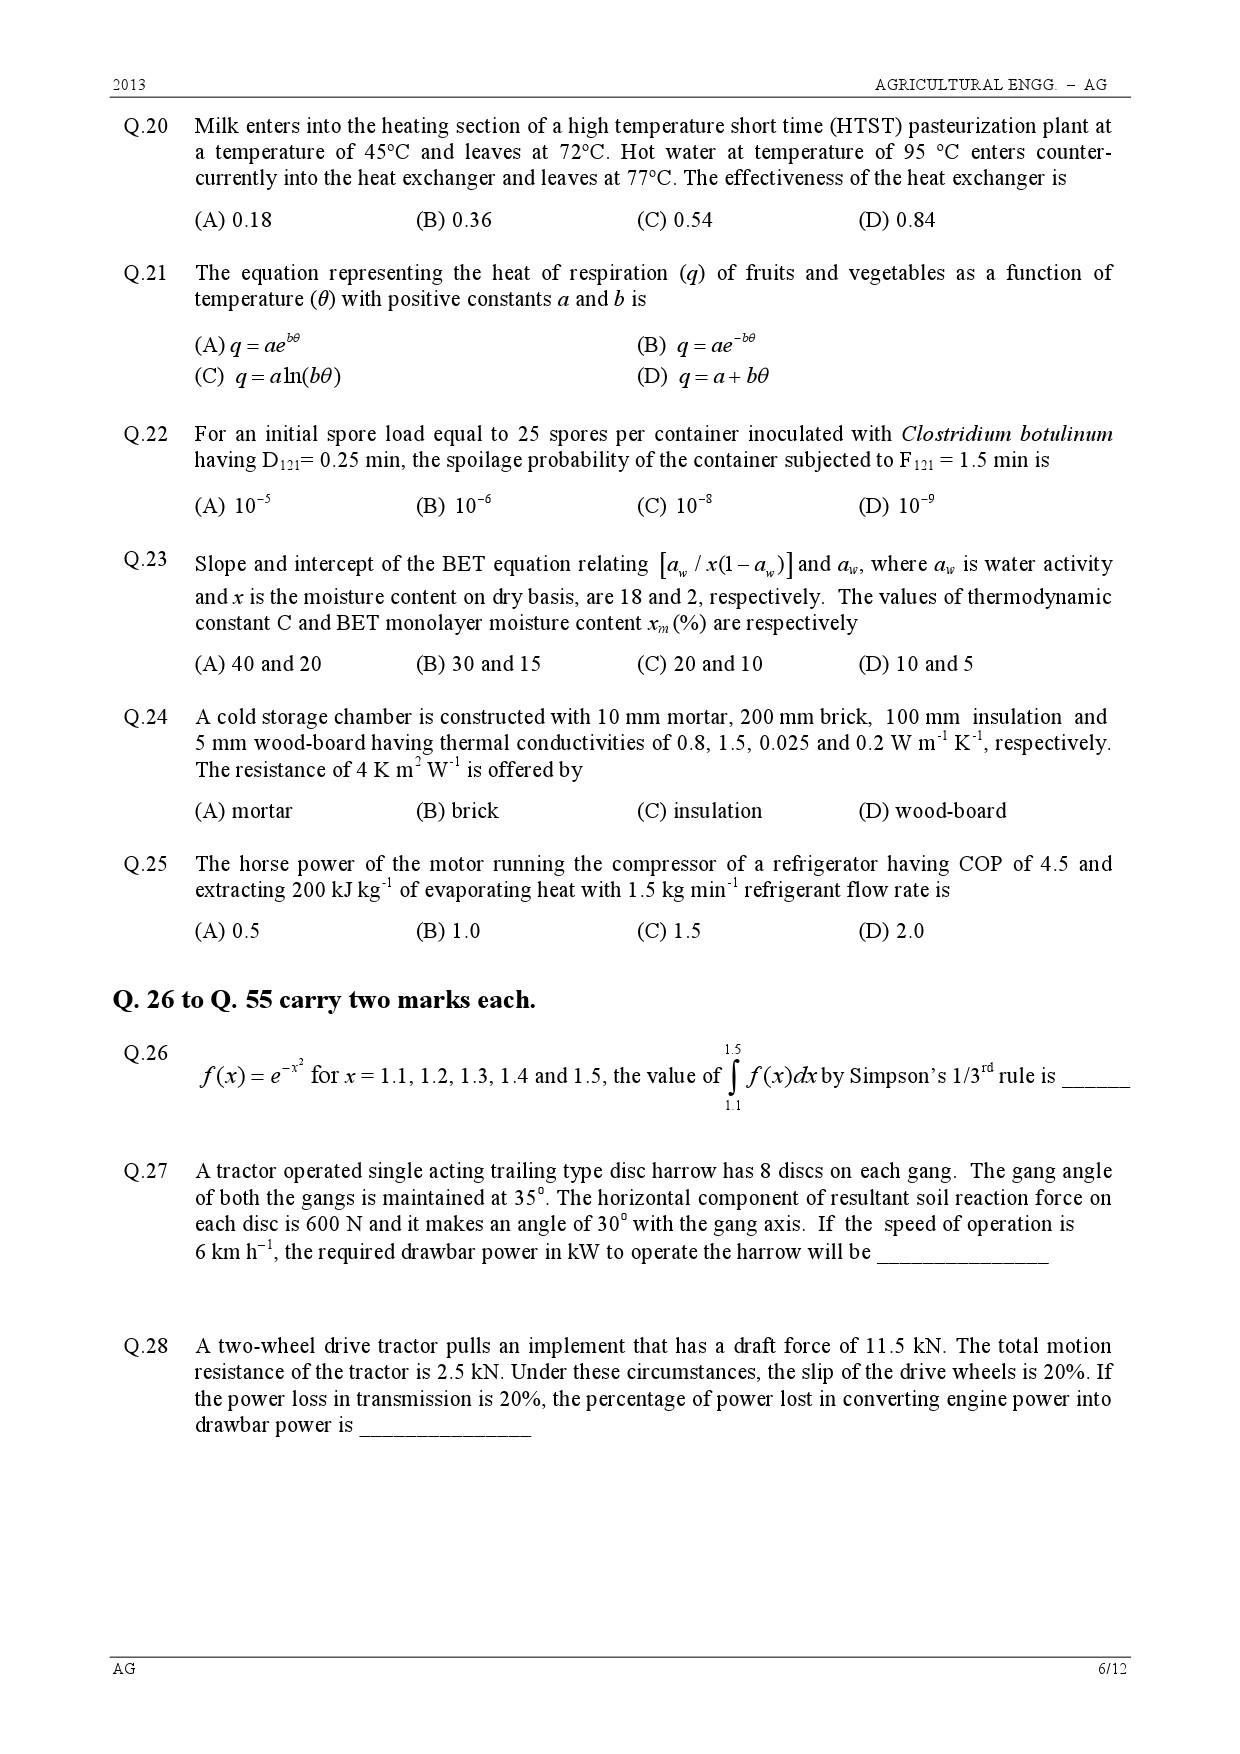 GATE Exam Question Paper 2013 Agricultural Engineering 6